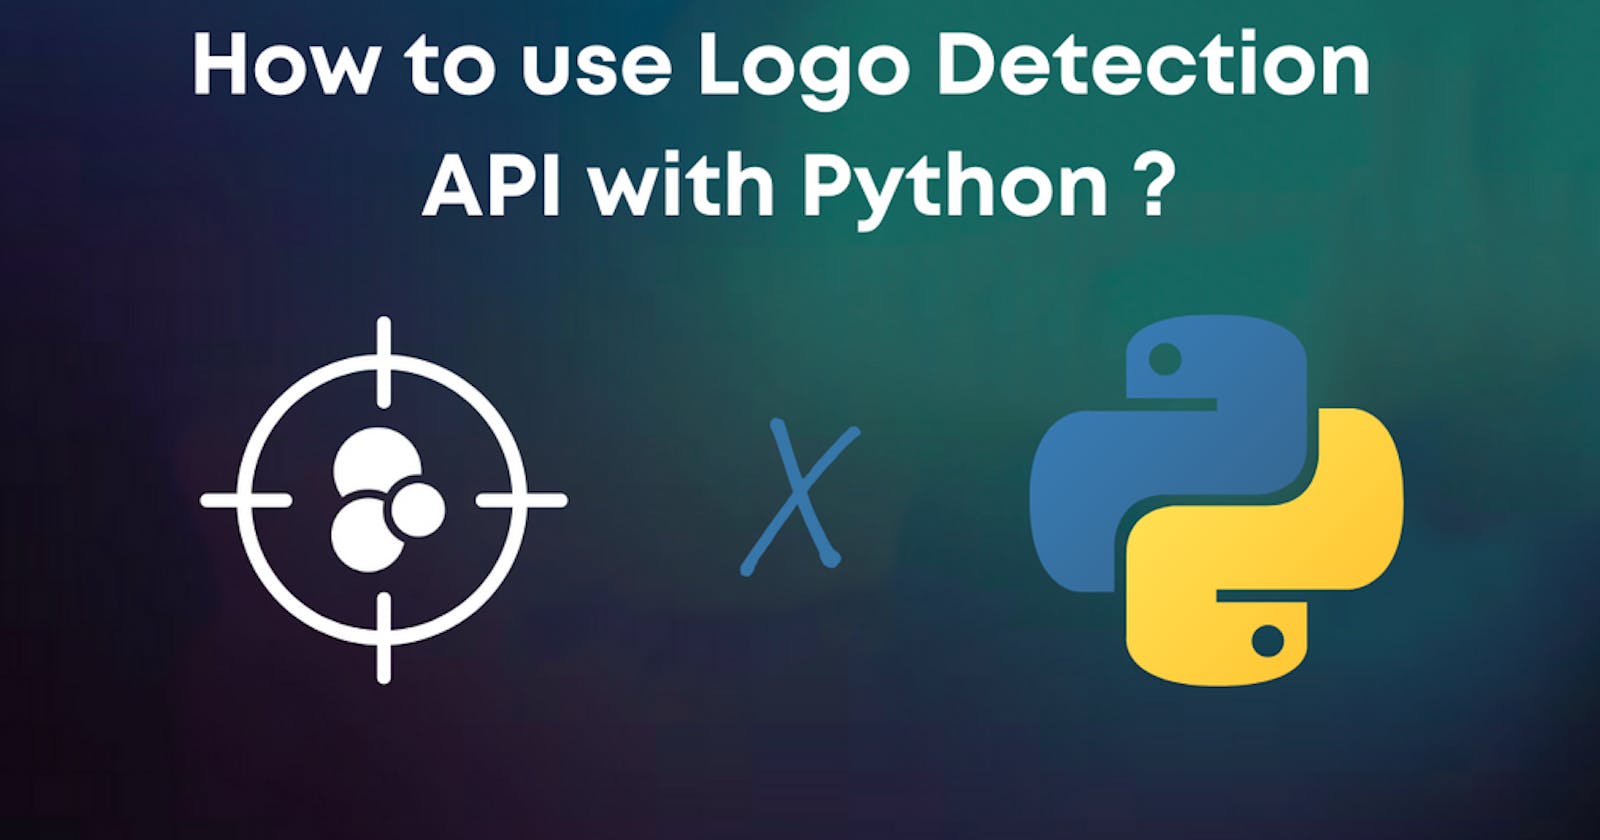 How to use Logo Detection API with Python in 5 minutes?